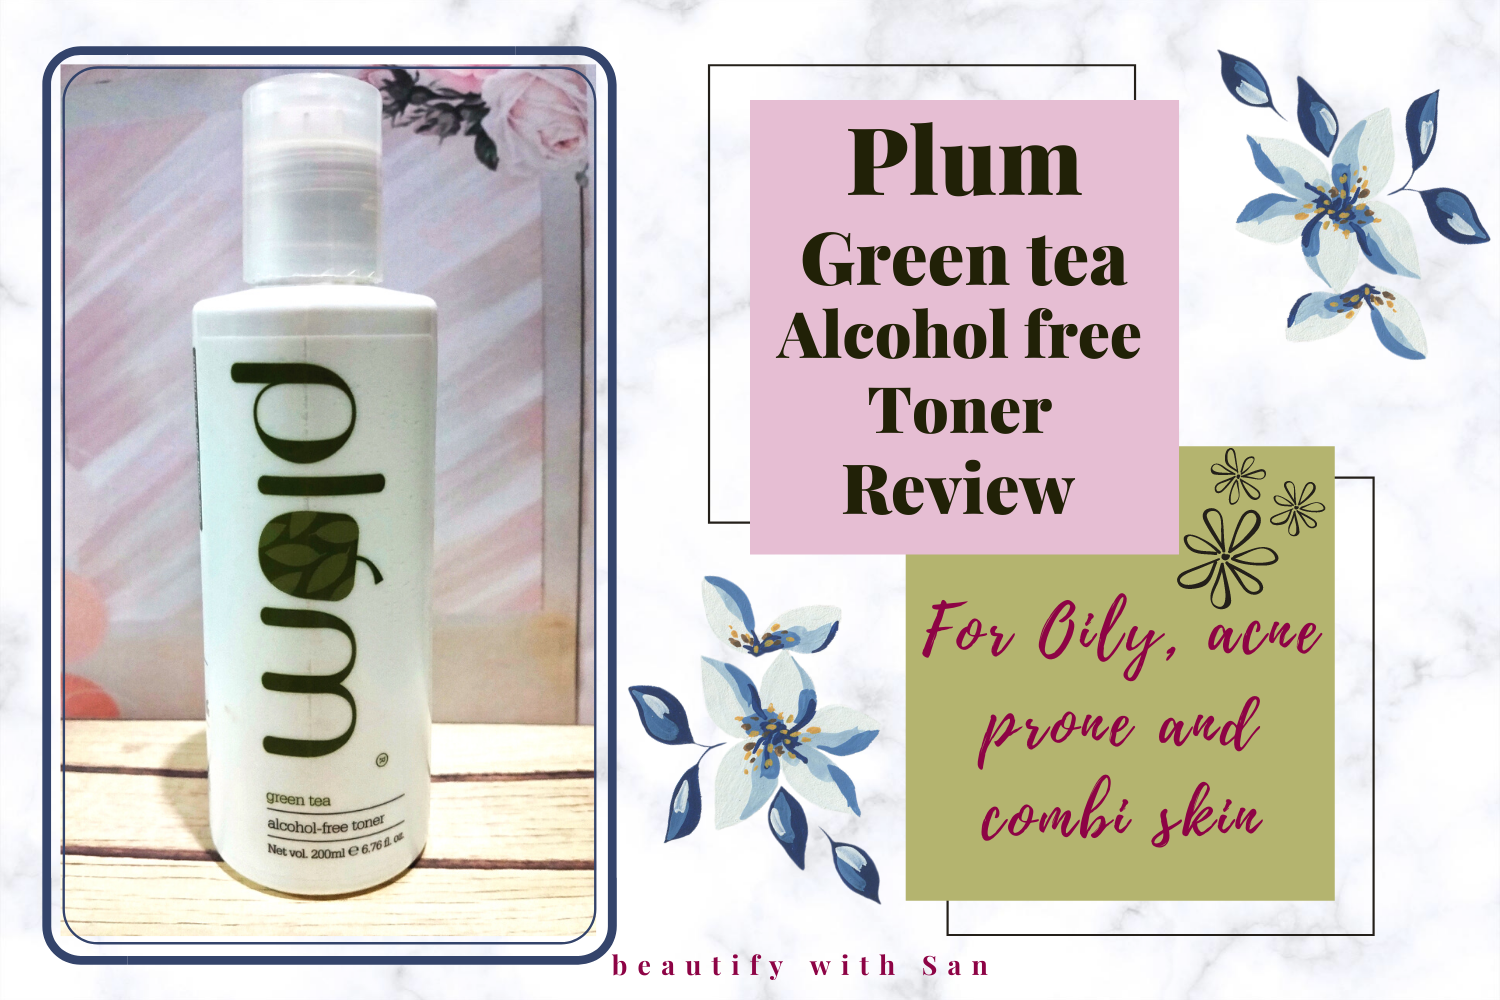 Plum Green Tea Alcohol free toner: Review, price and more